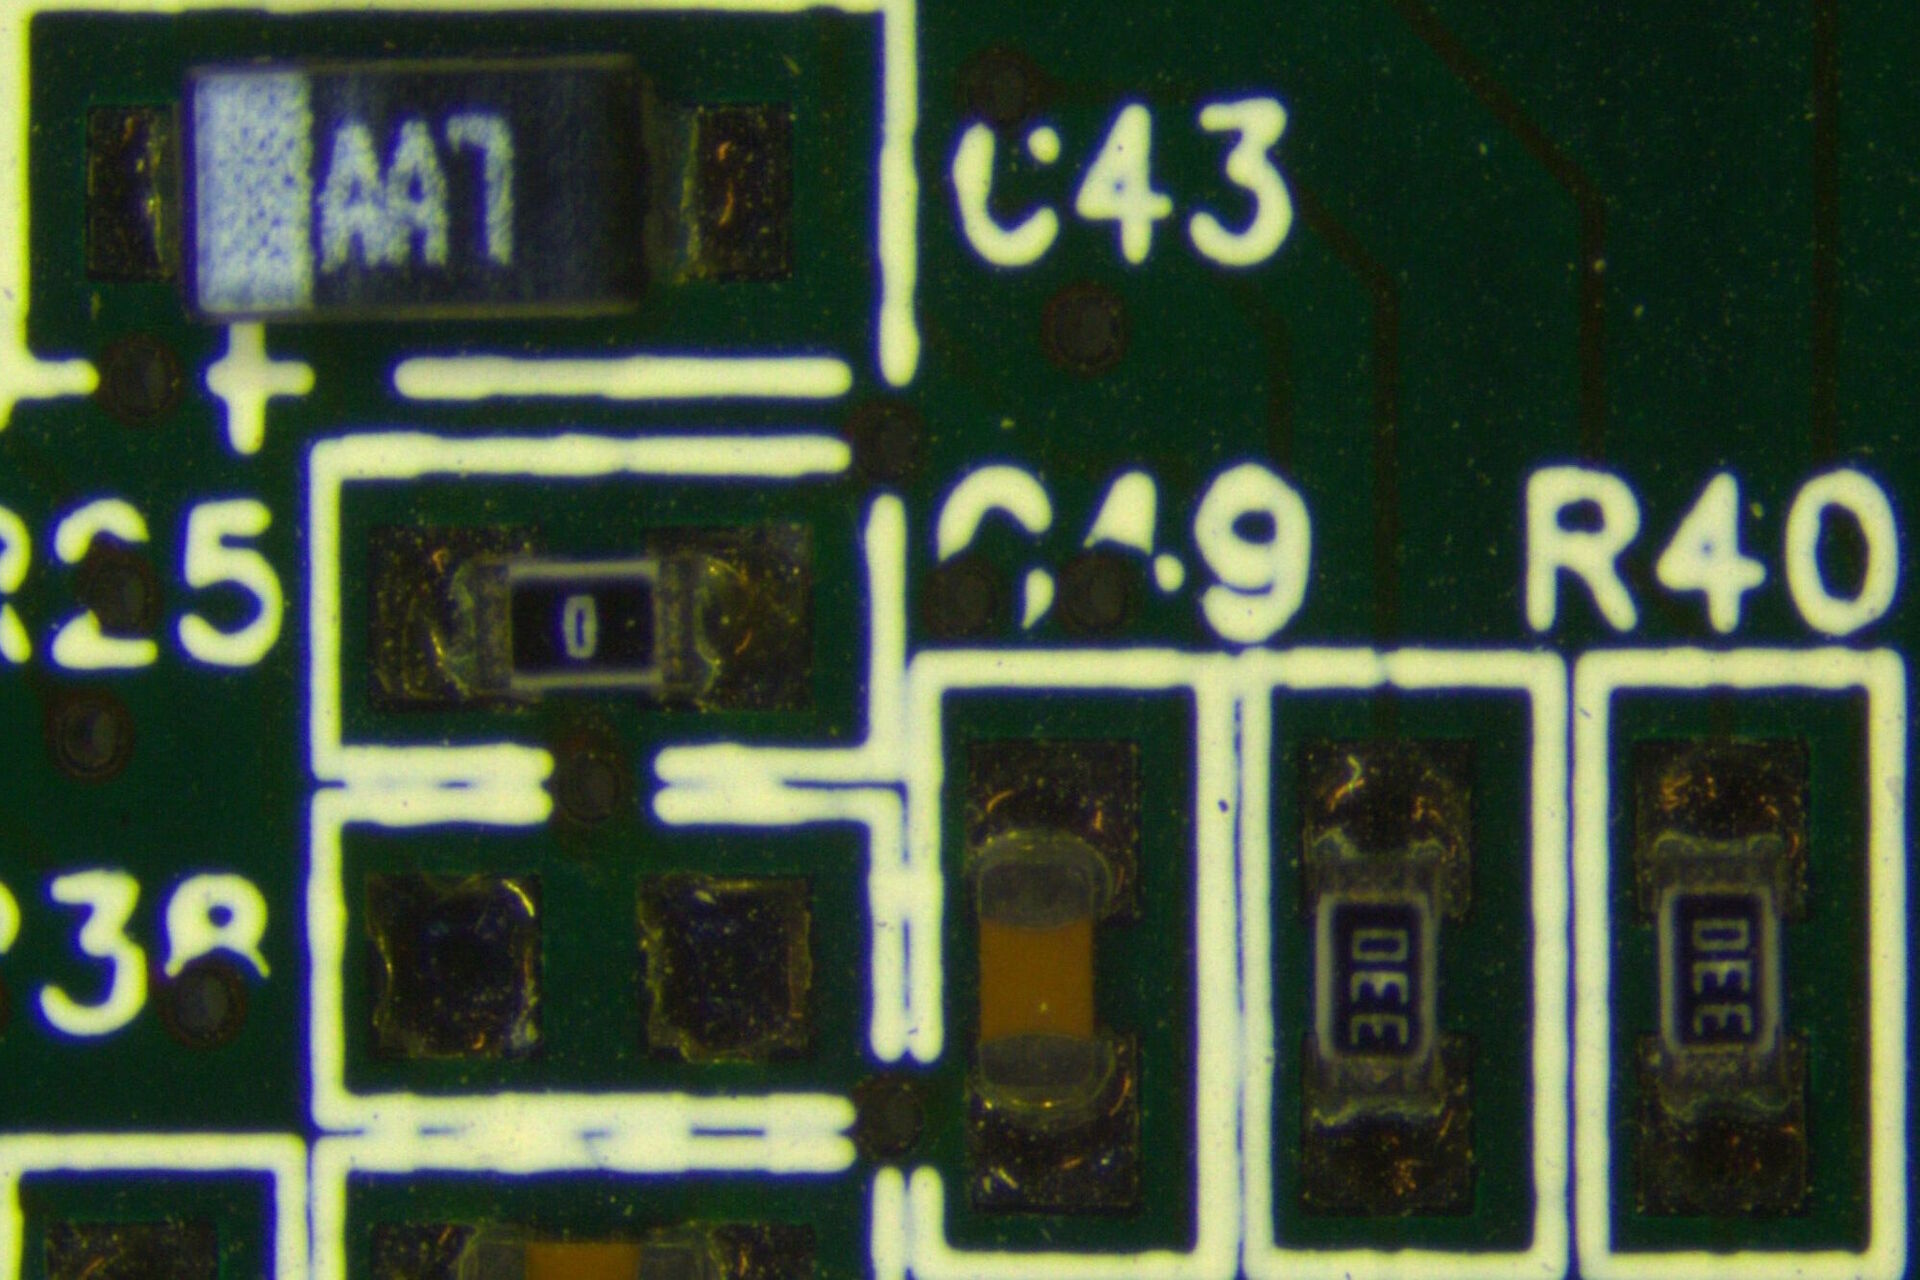 Printed Circuit Board (PCB) - RL with crossed polarizers: Reflective areas